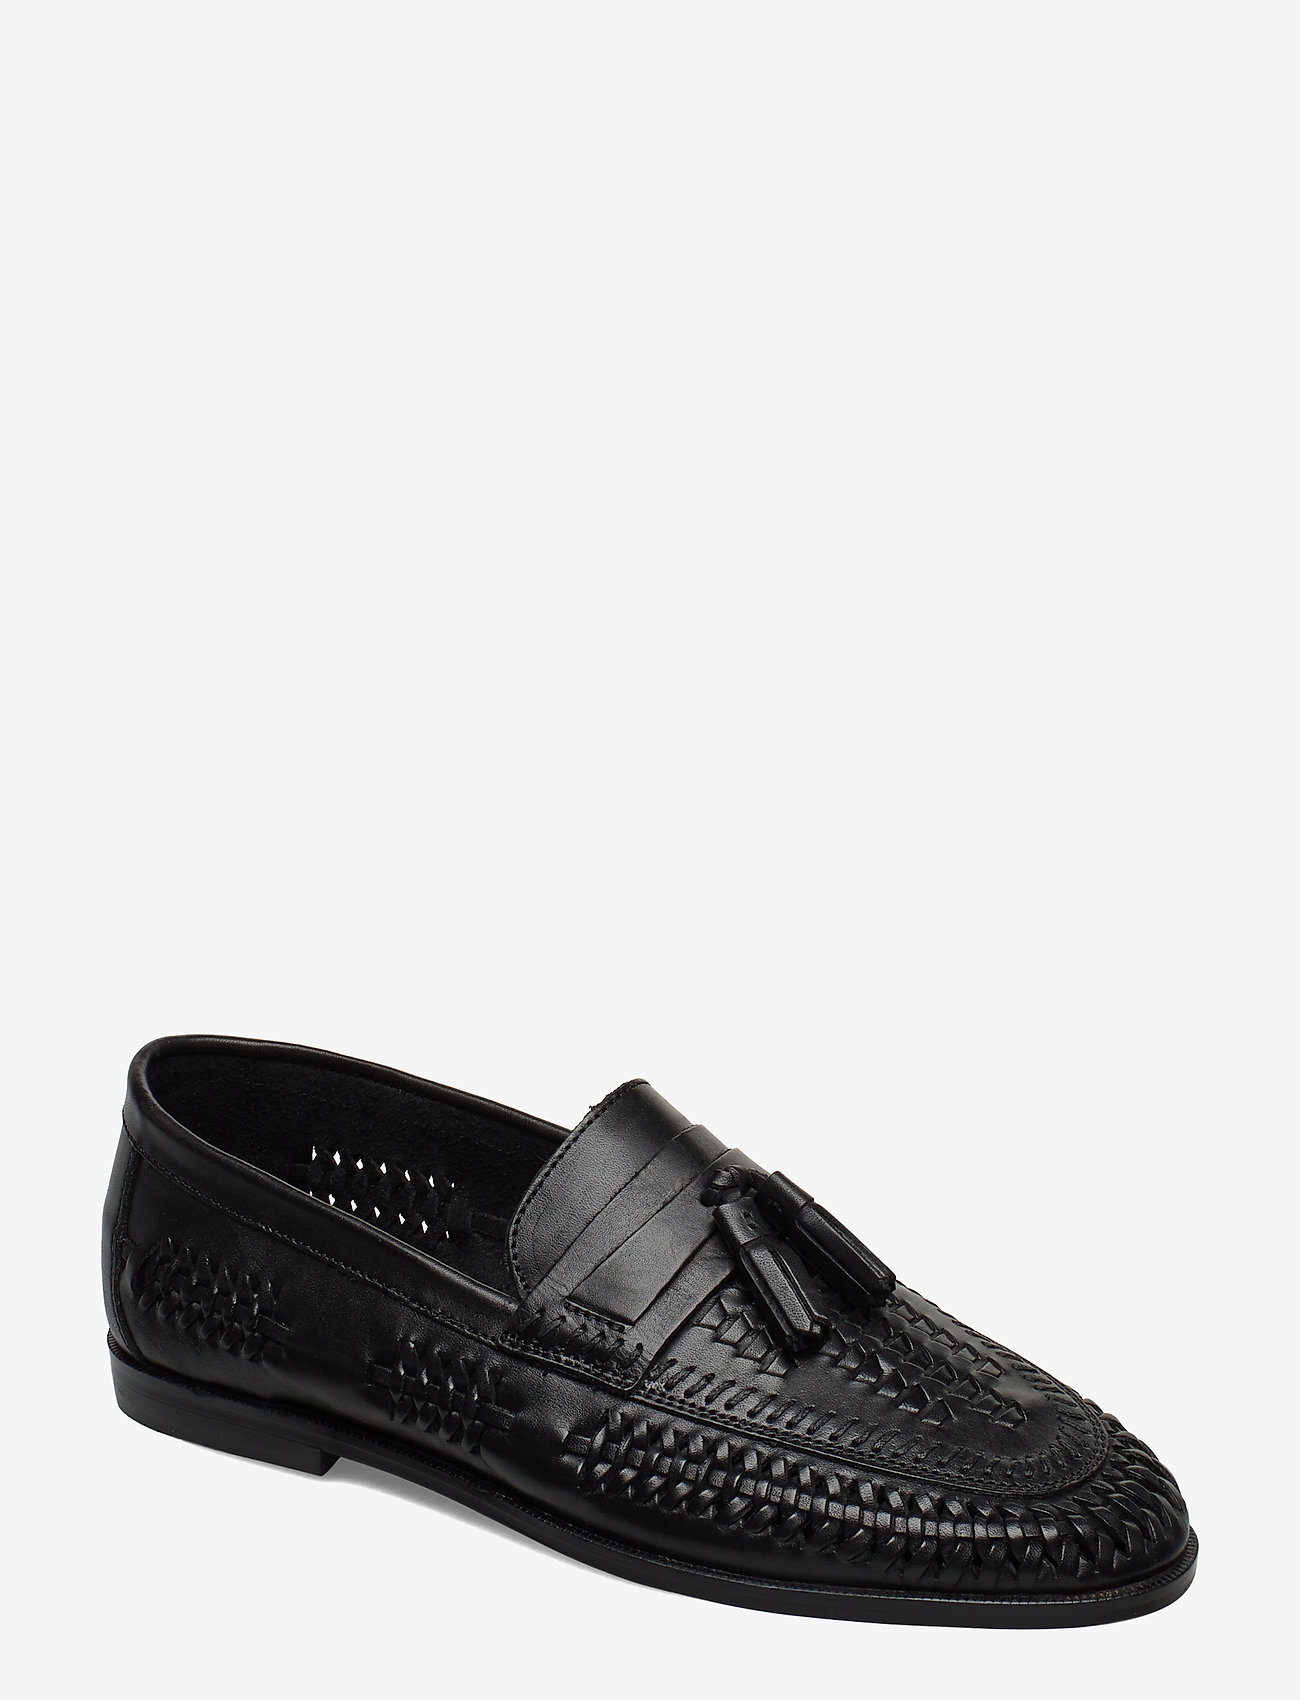 dune mens loafers sale